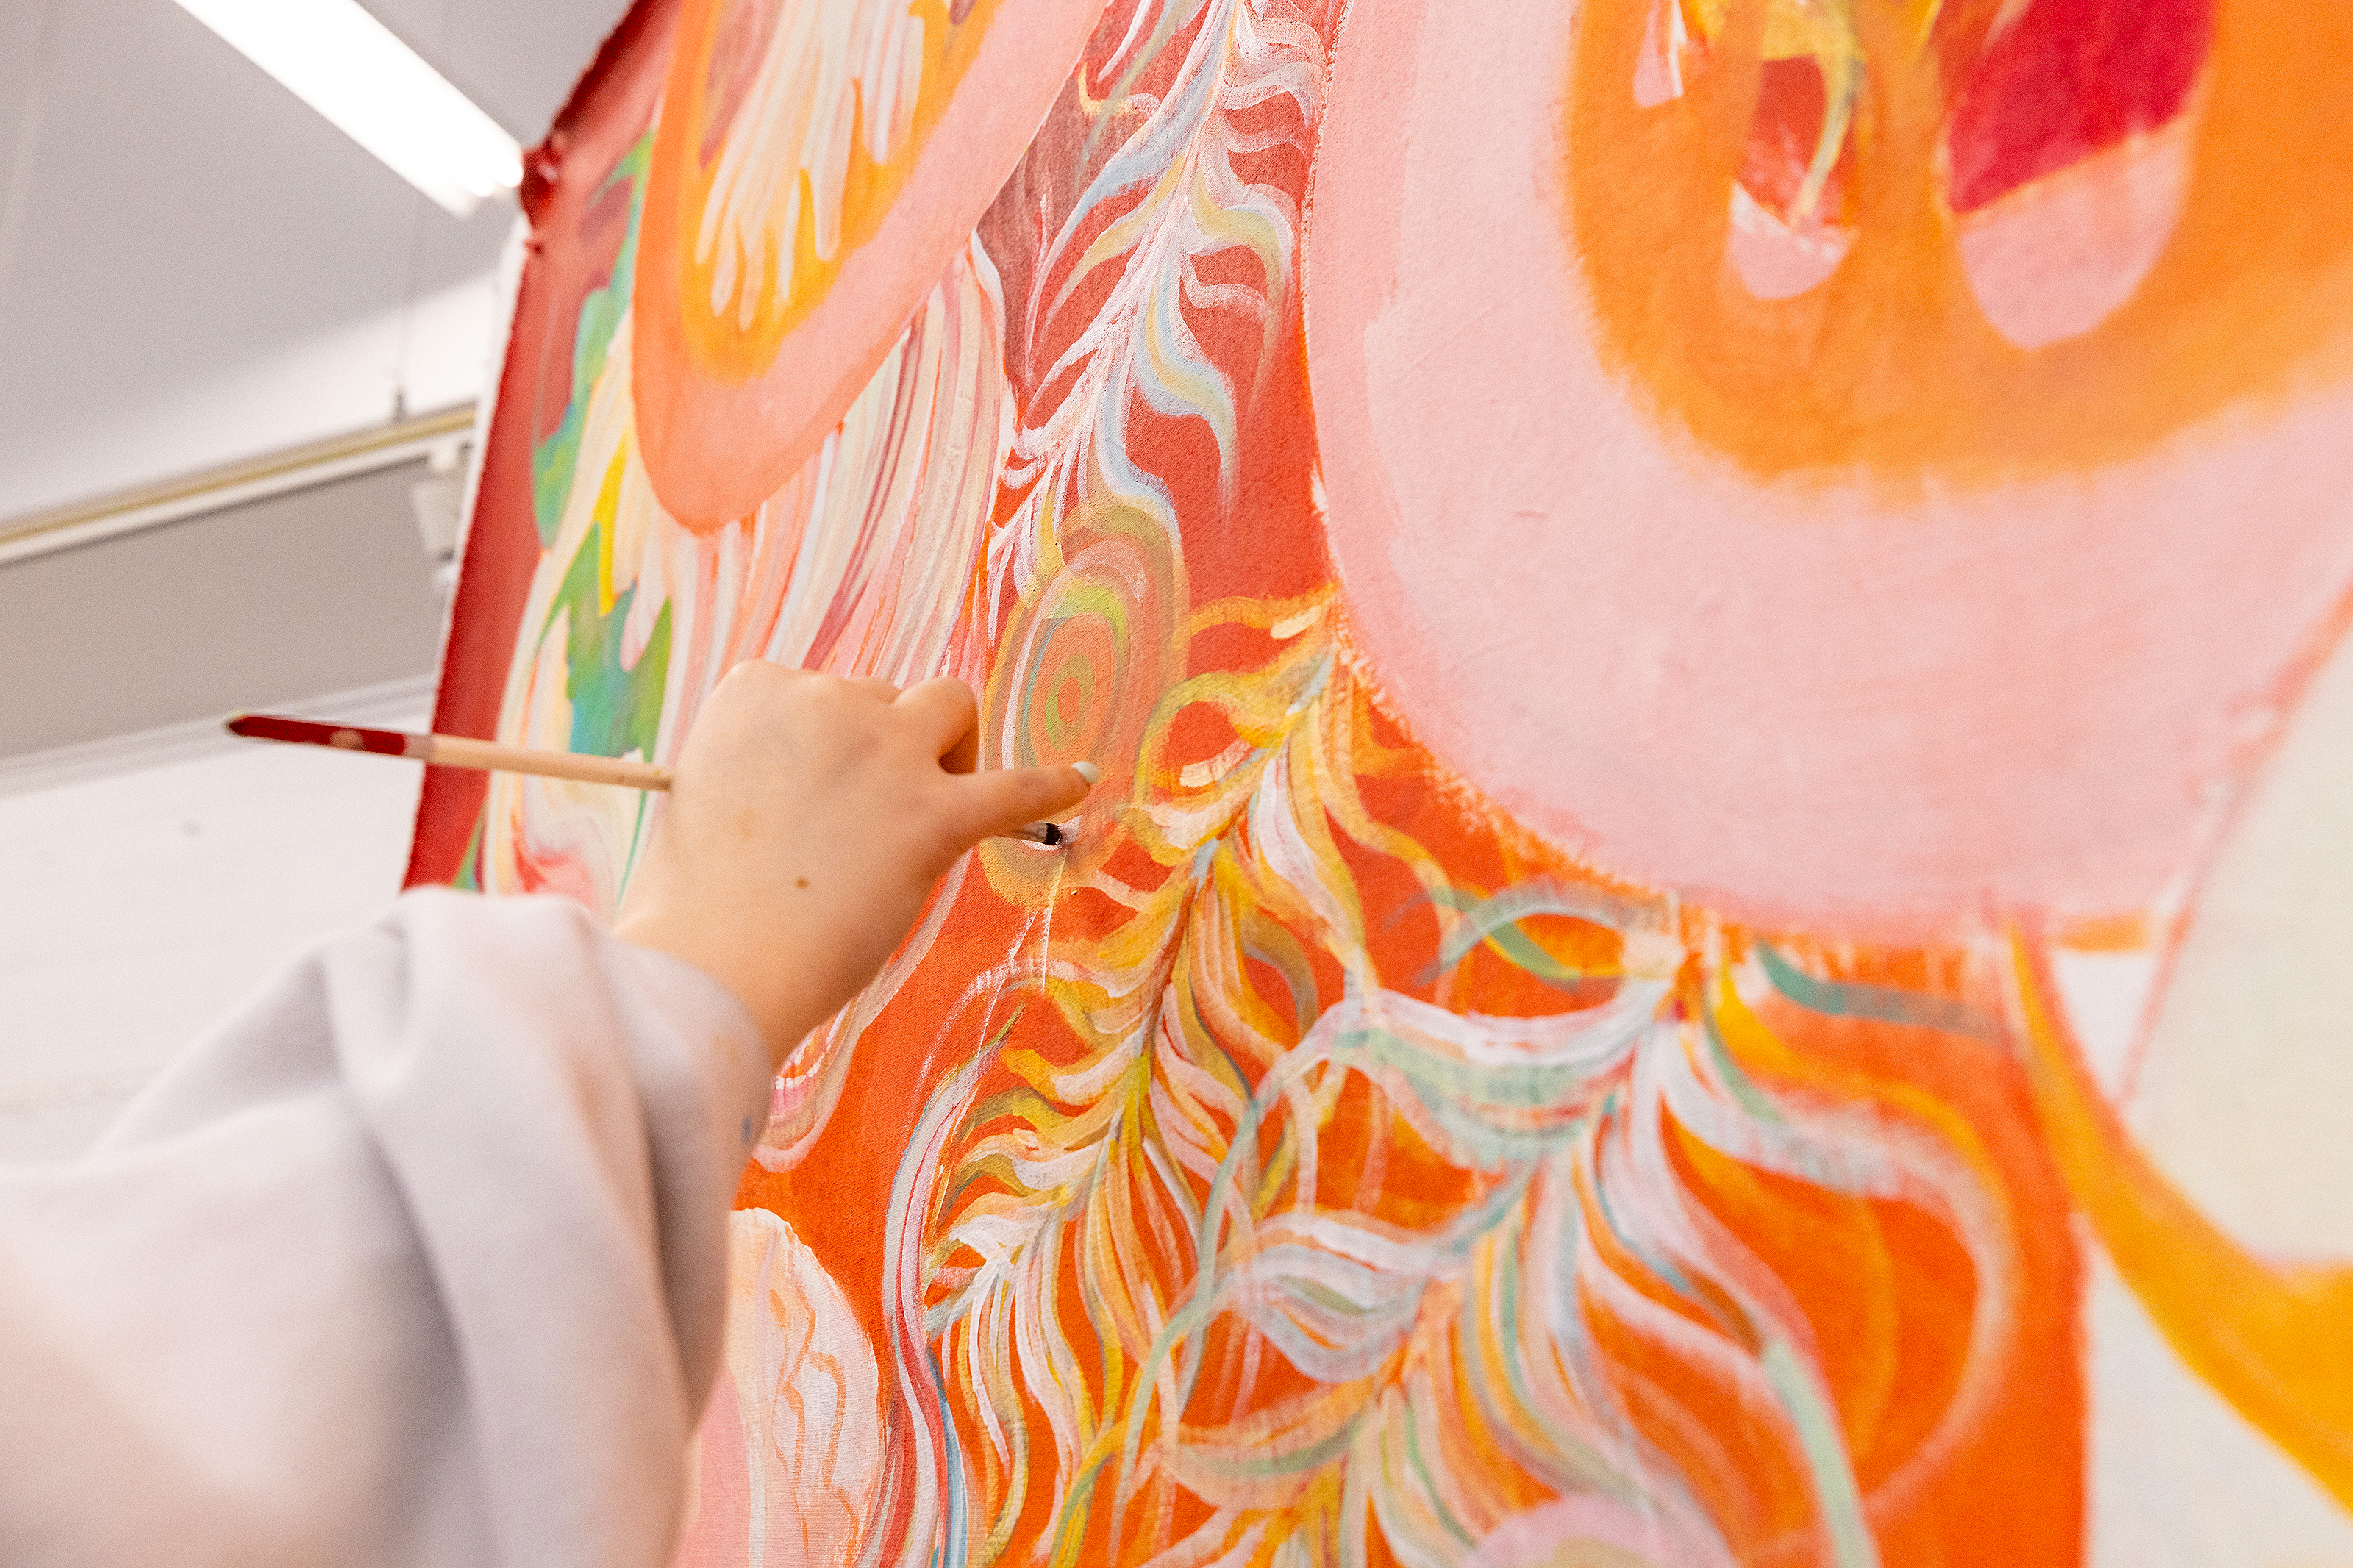 close-up of a hand holding a paint brush and working on an orange dragon